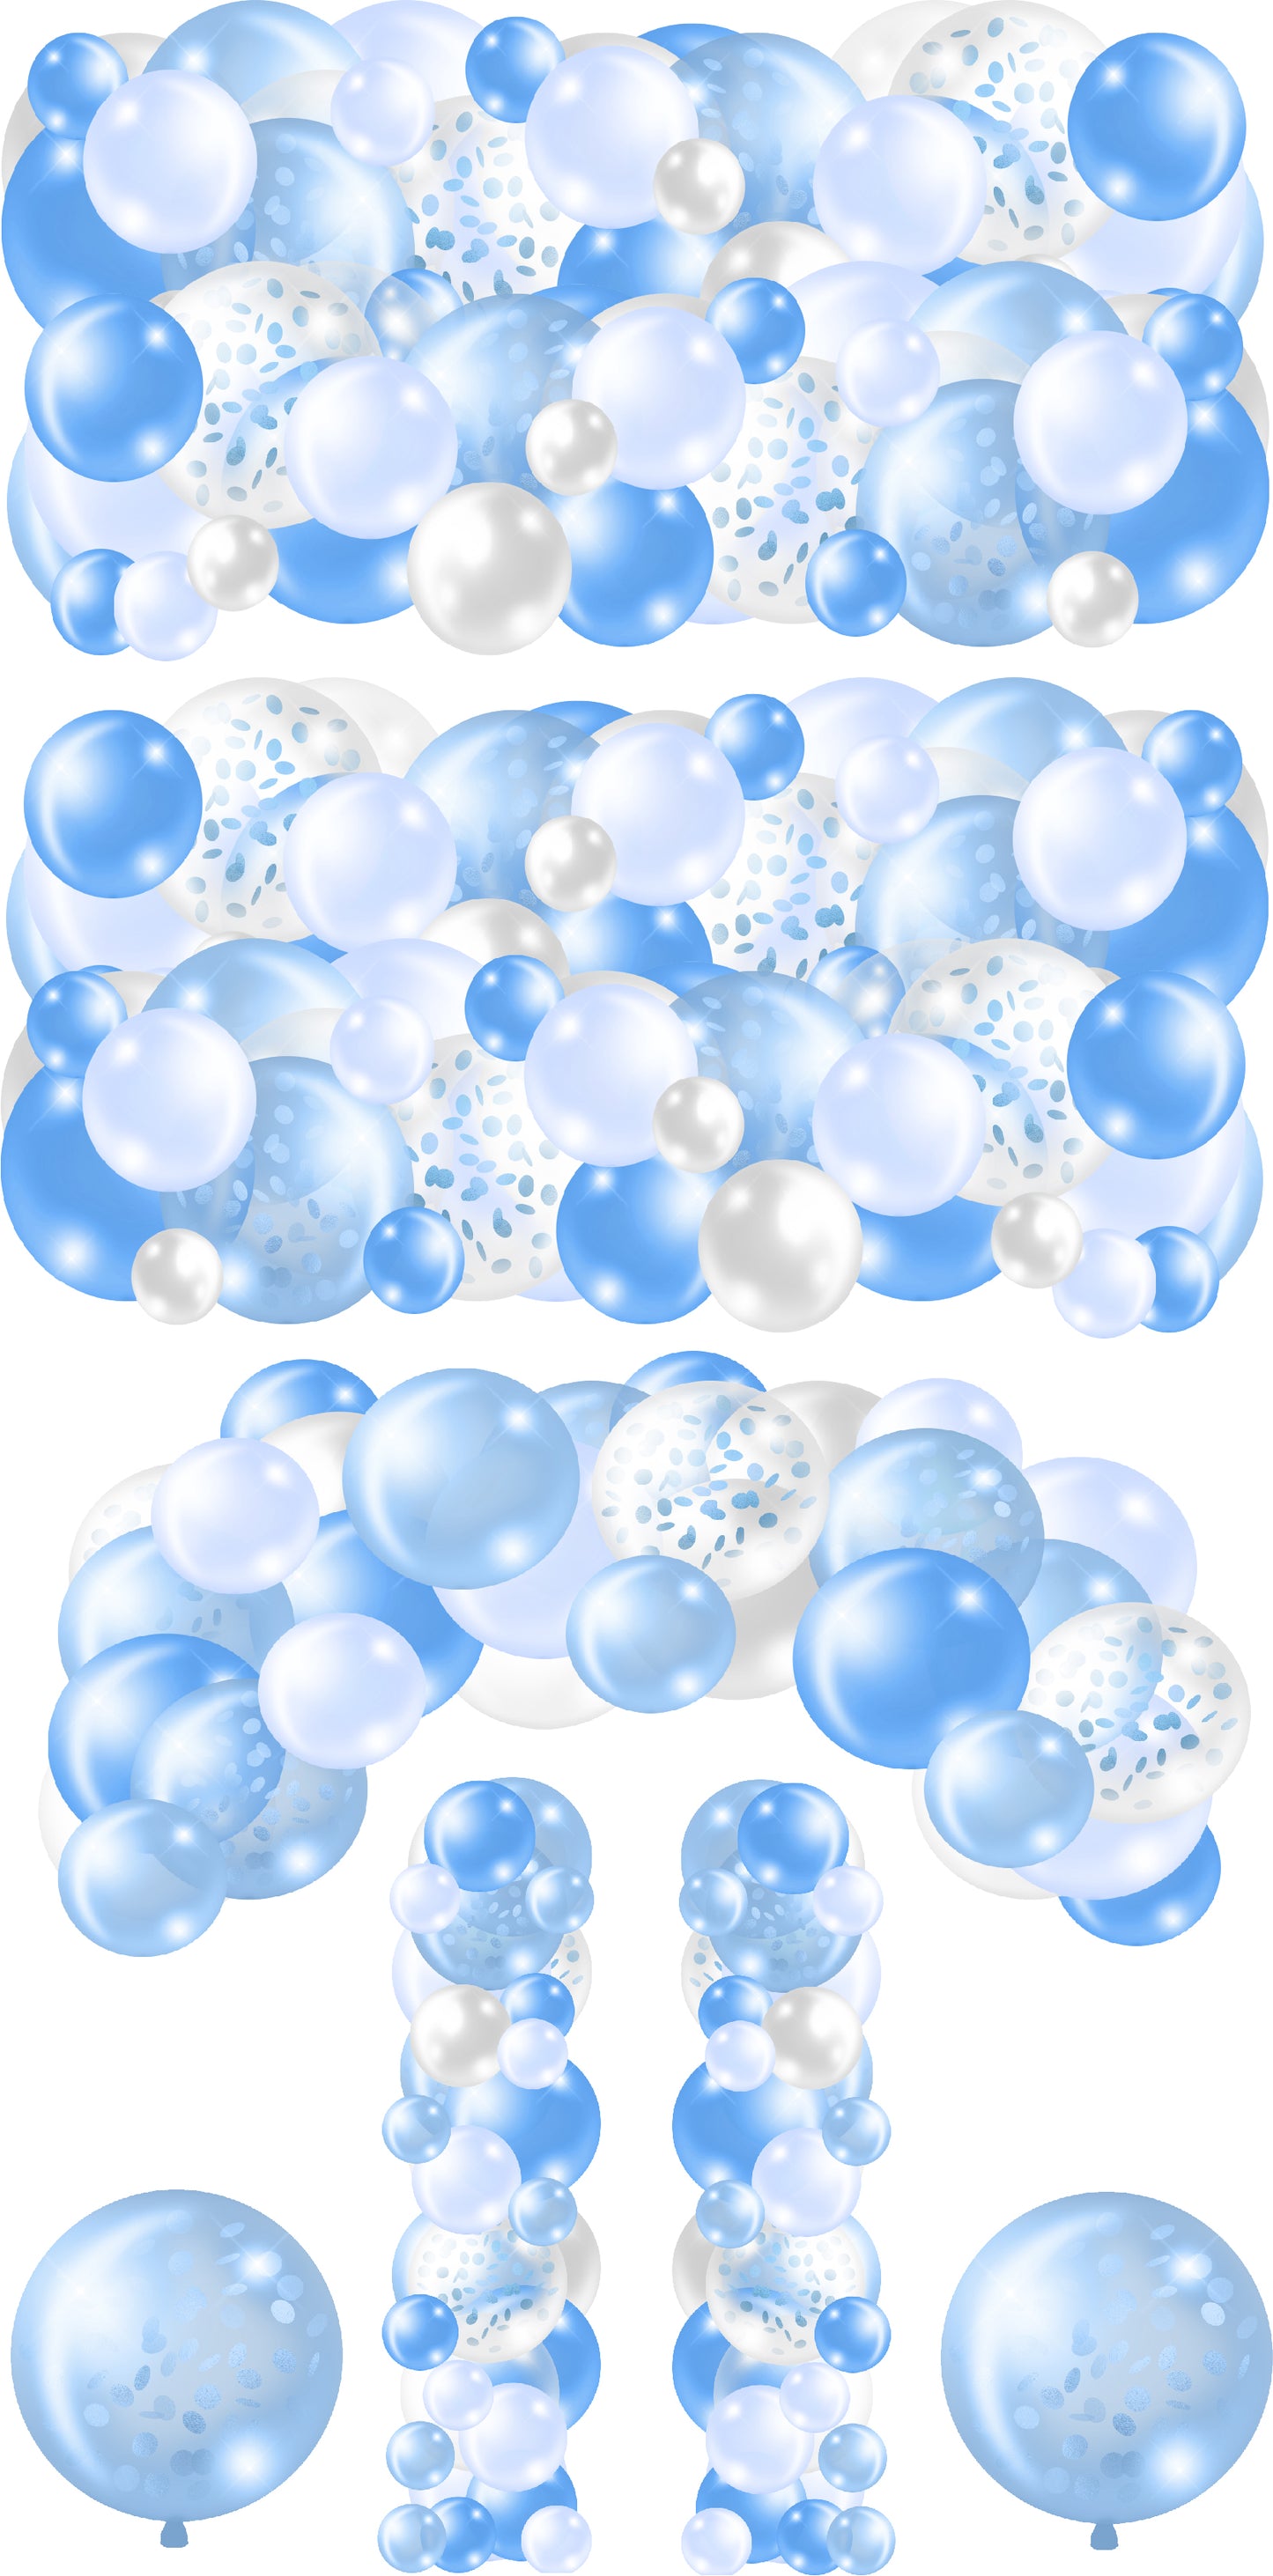 Blue and White Balloons Bunches Skirts, Ez Fillers, Arch, and Column